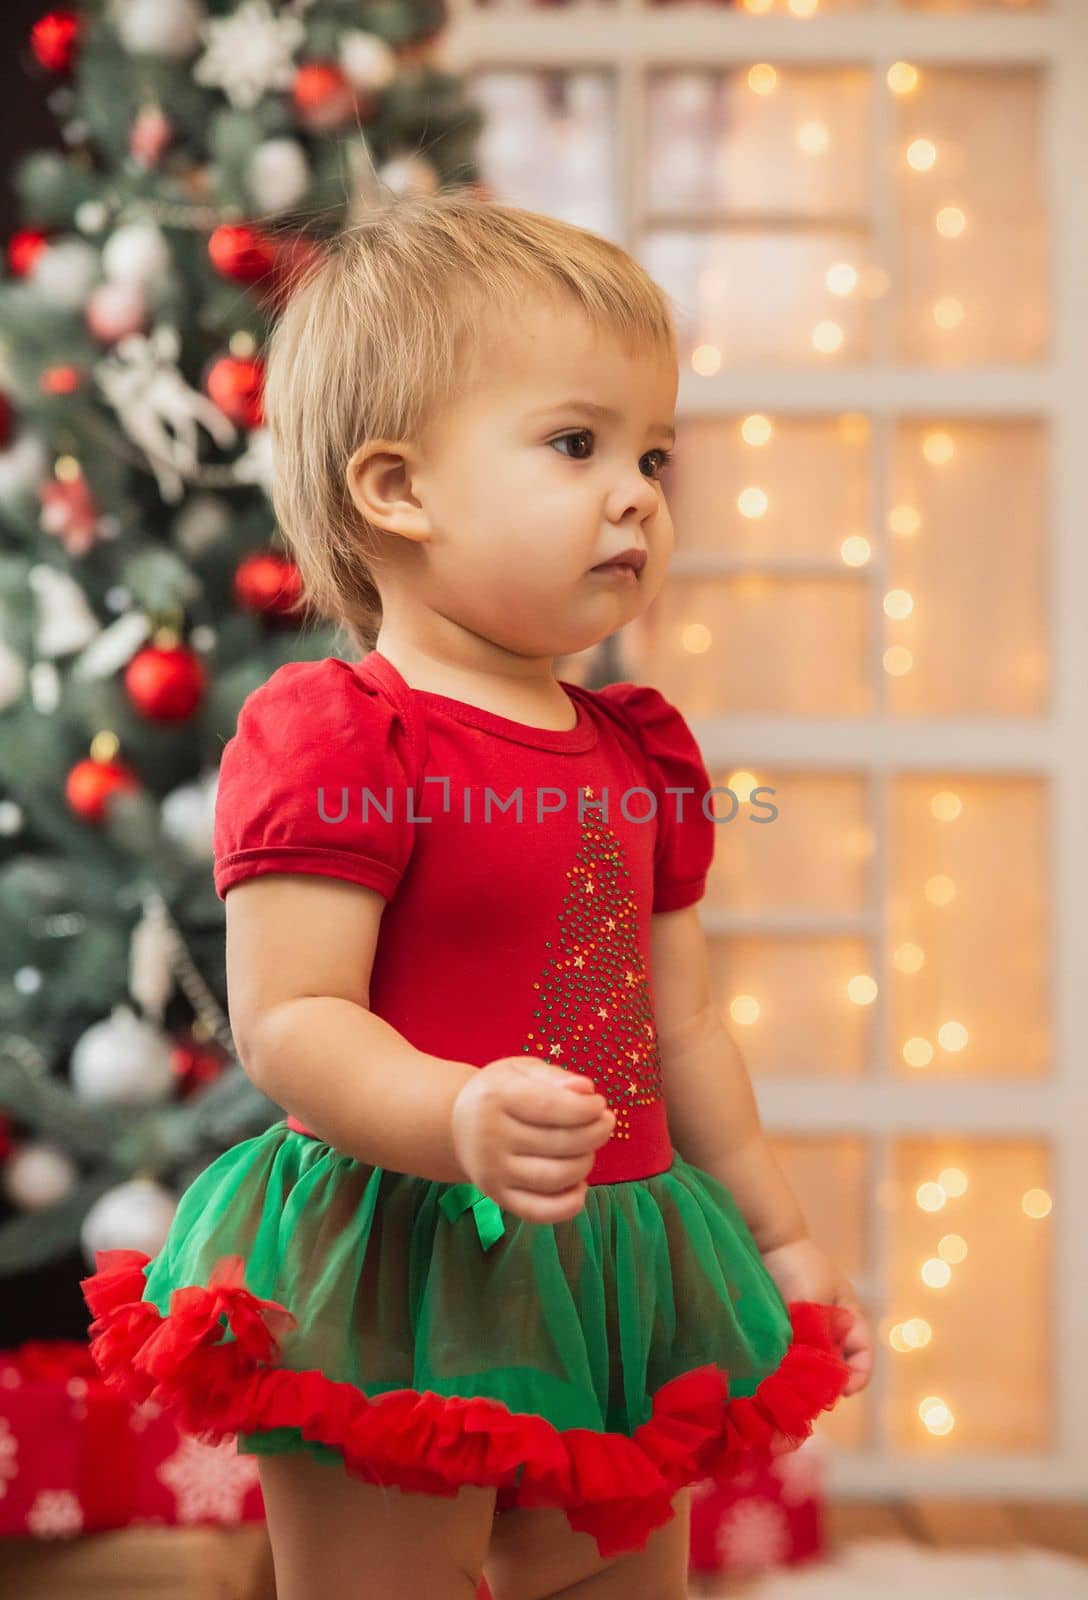 Beautiful baby in a New Year's suit. Christmas decorations.